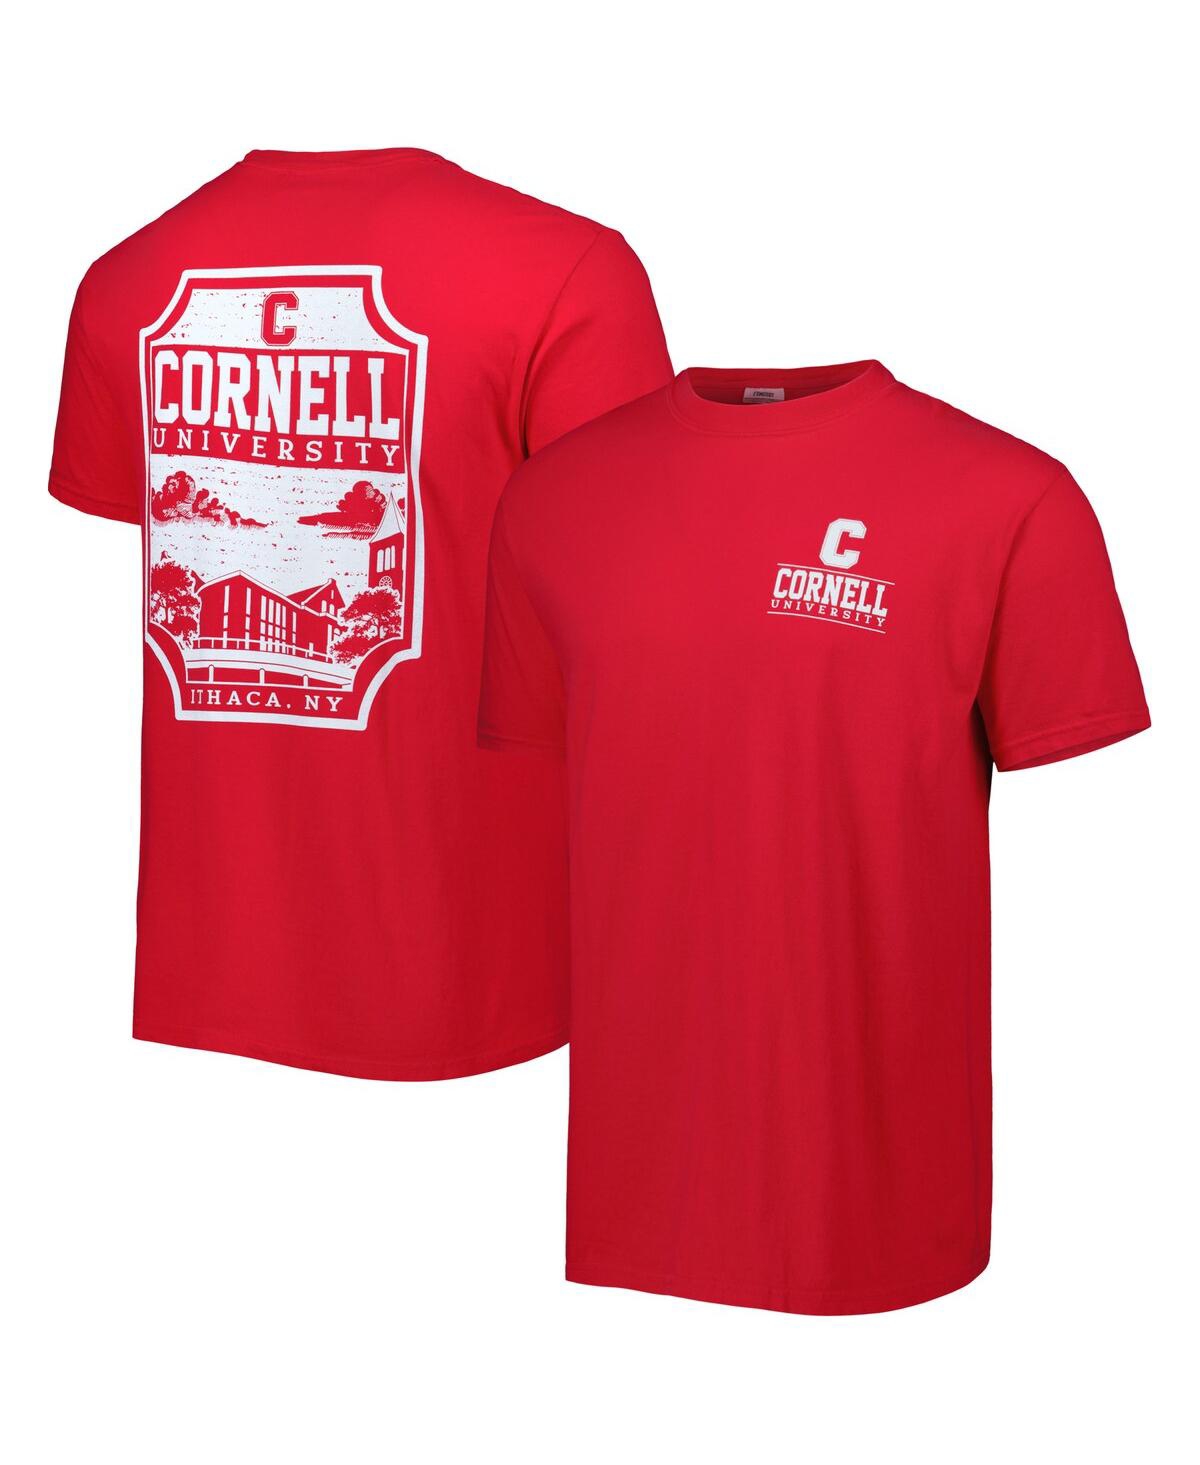 IMAGE ONE MEN'S RED CORNELL BIG RED LOGO CAMPUS ICON T-SHIRT